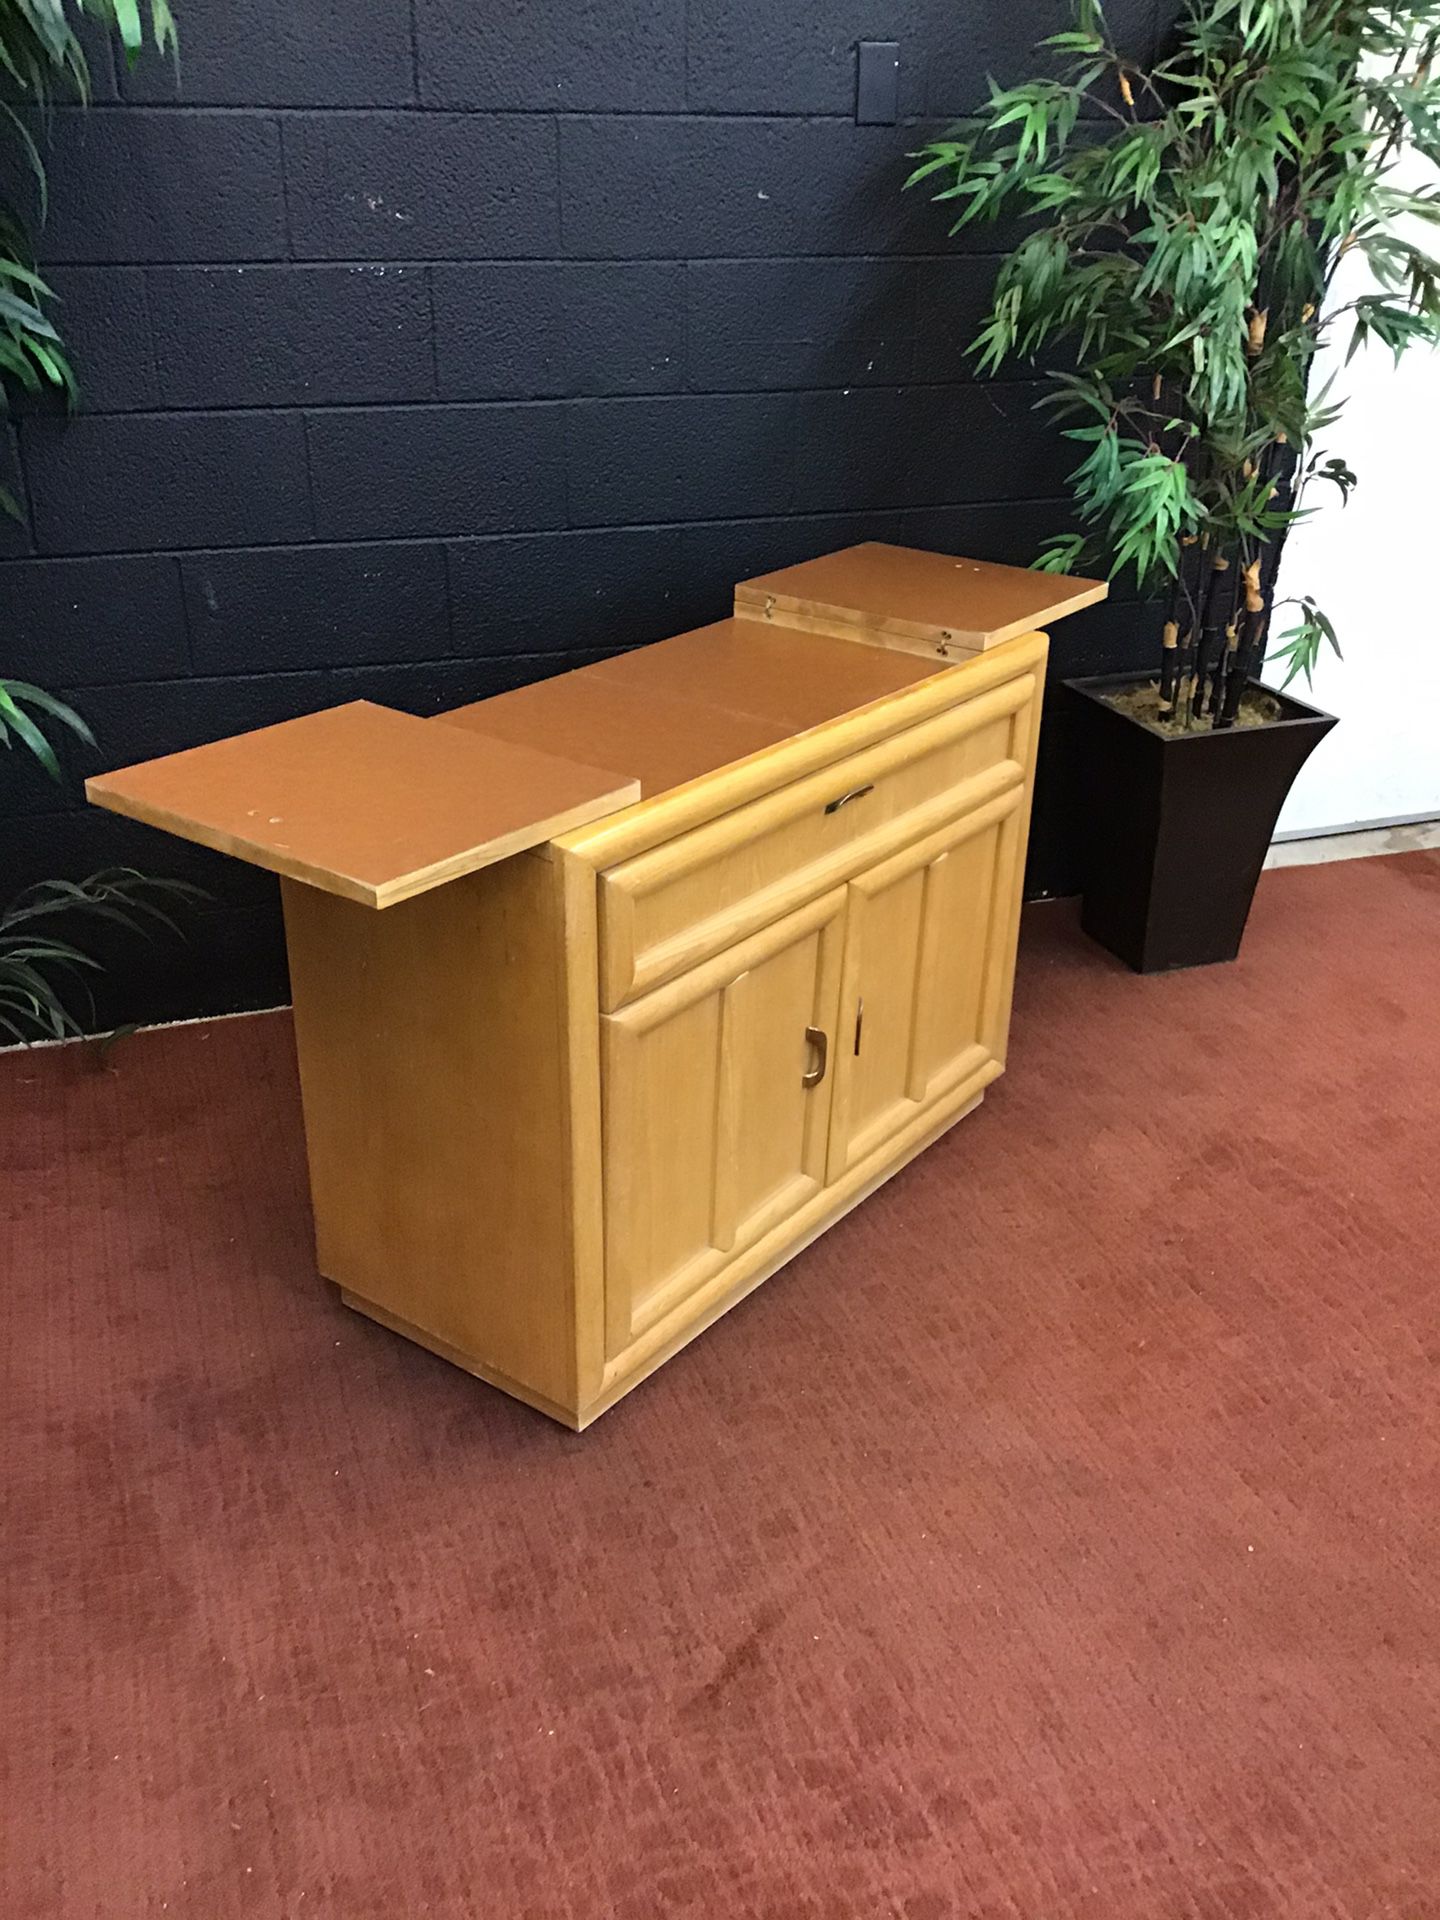 Stanley Furniture Art Deco Rolling Wet Bar for Sale in Cottonwood